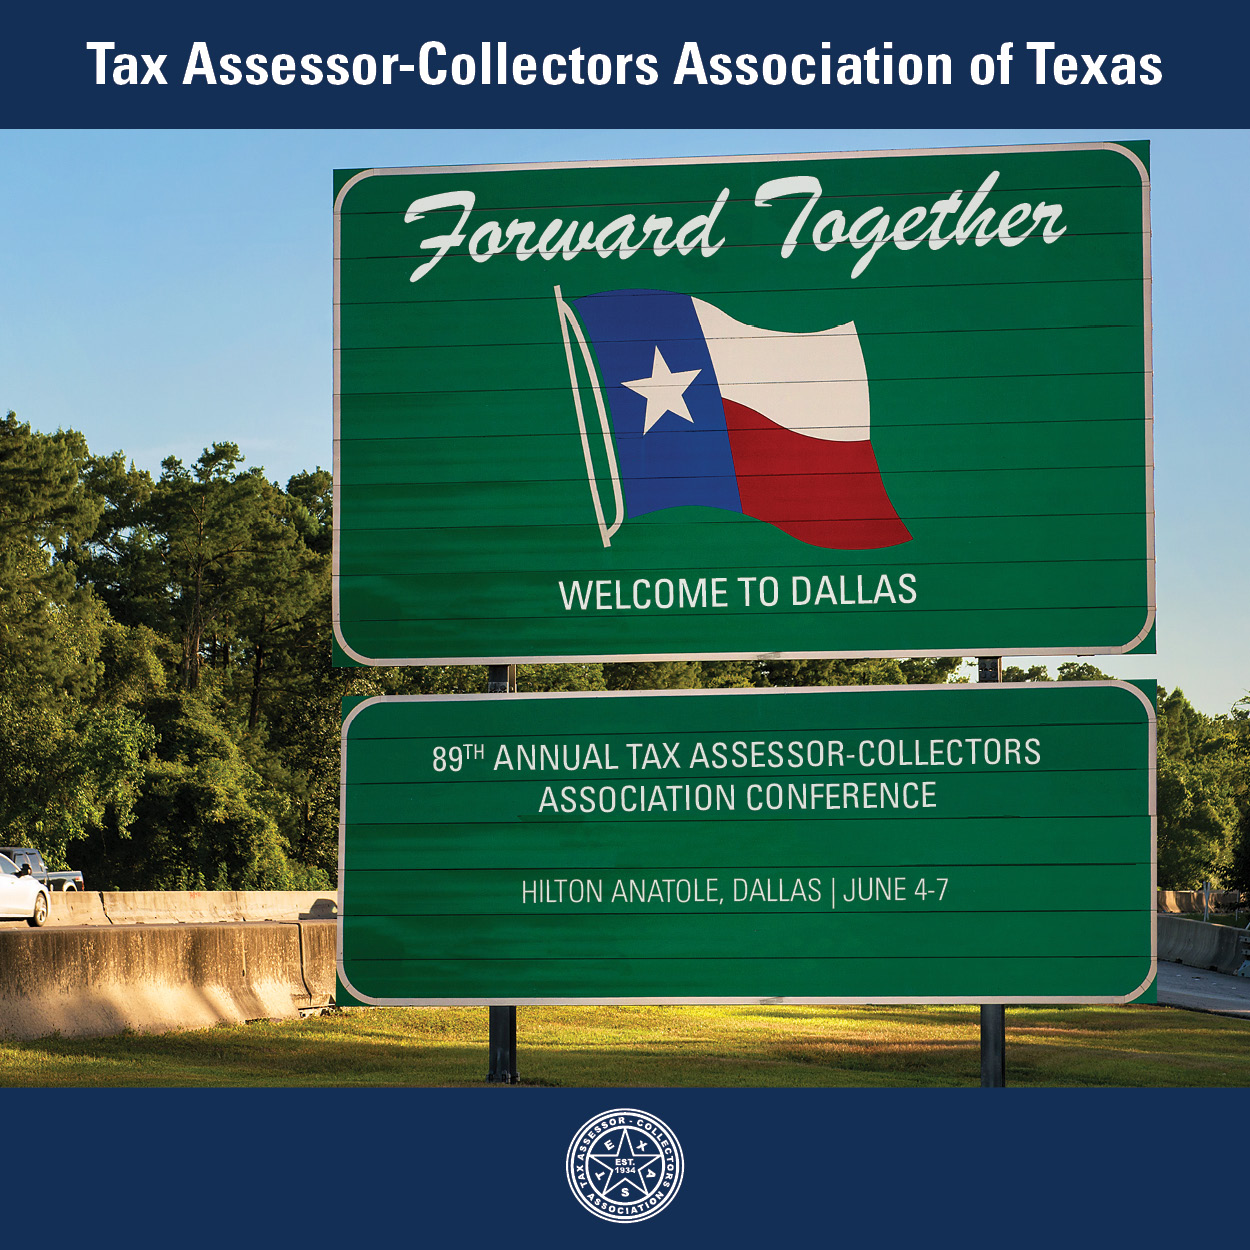 89th Annual Tax Assessor-Collectors Association Conference